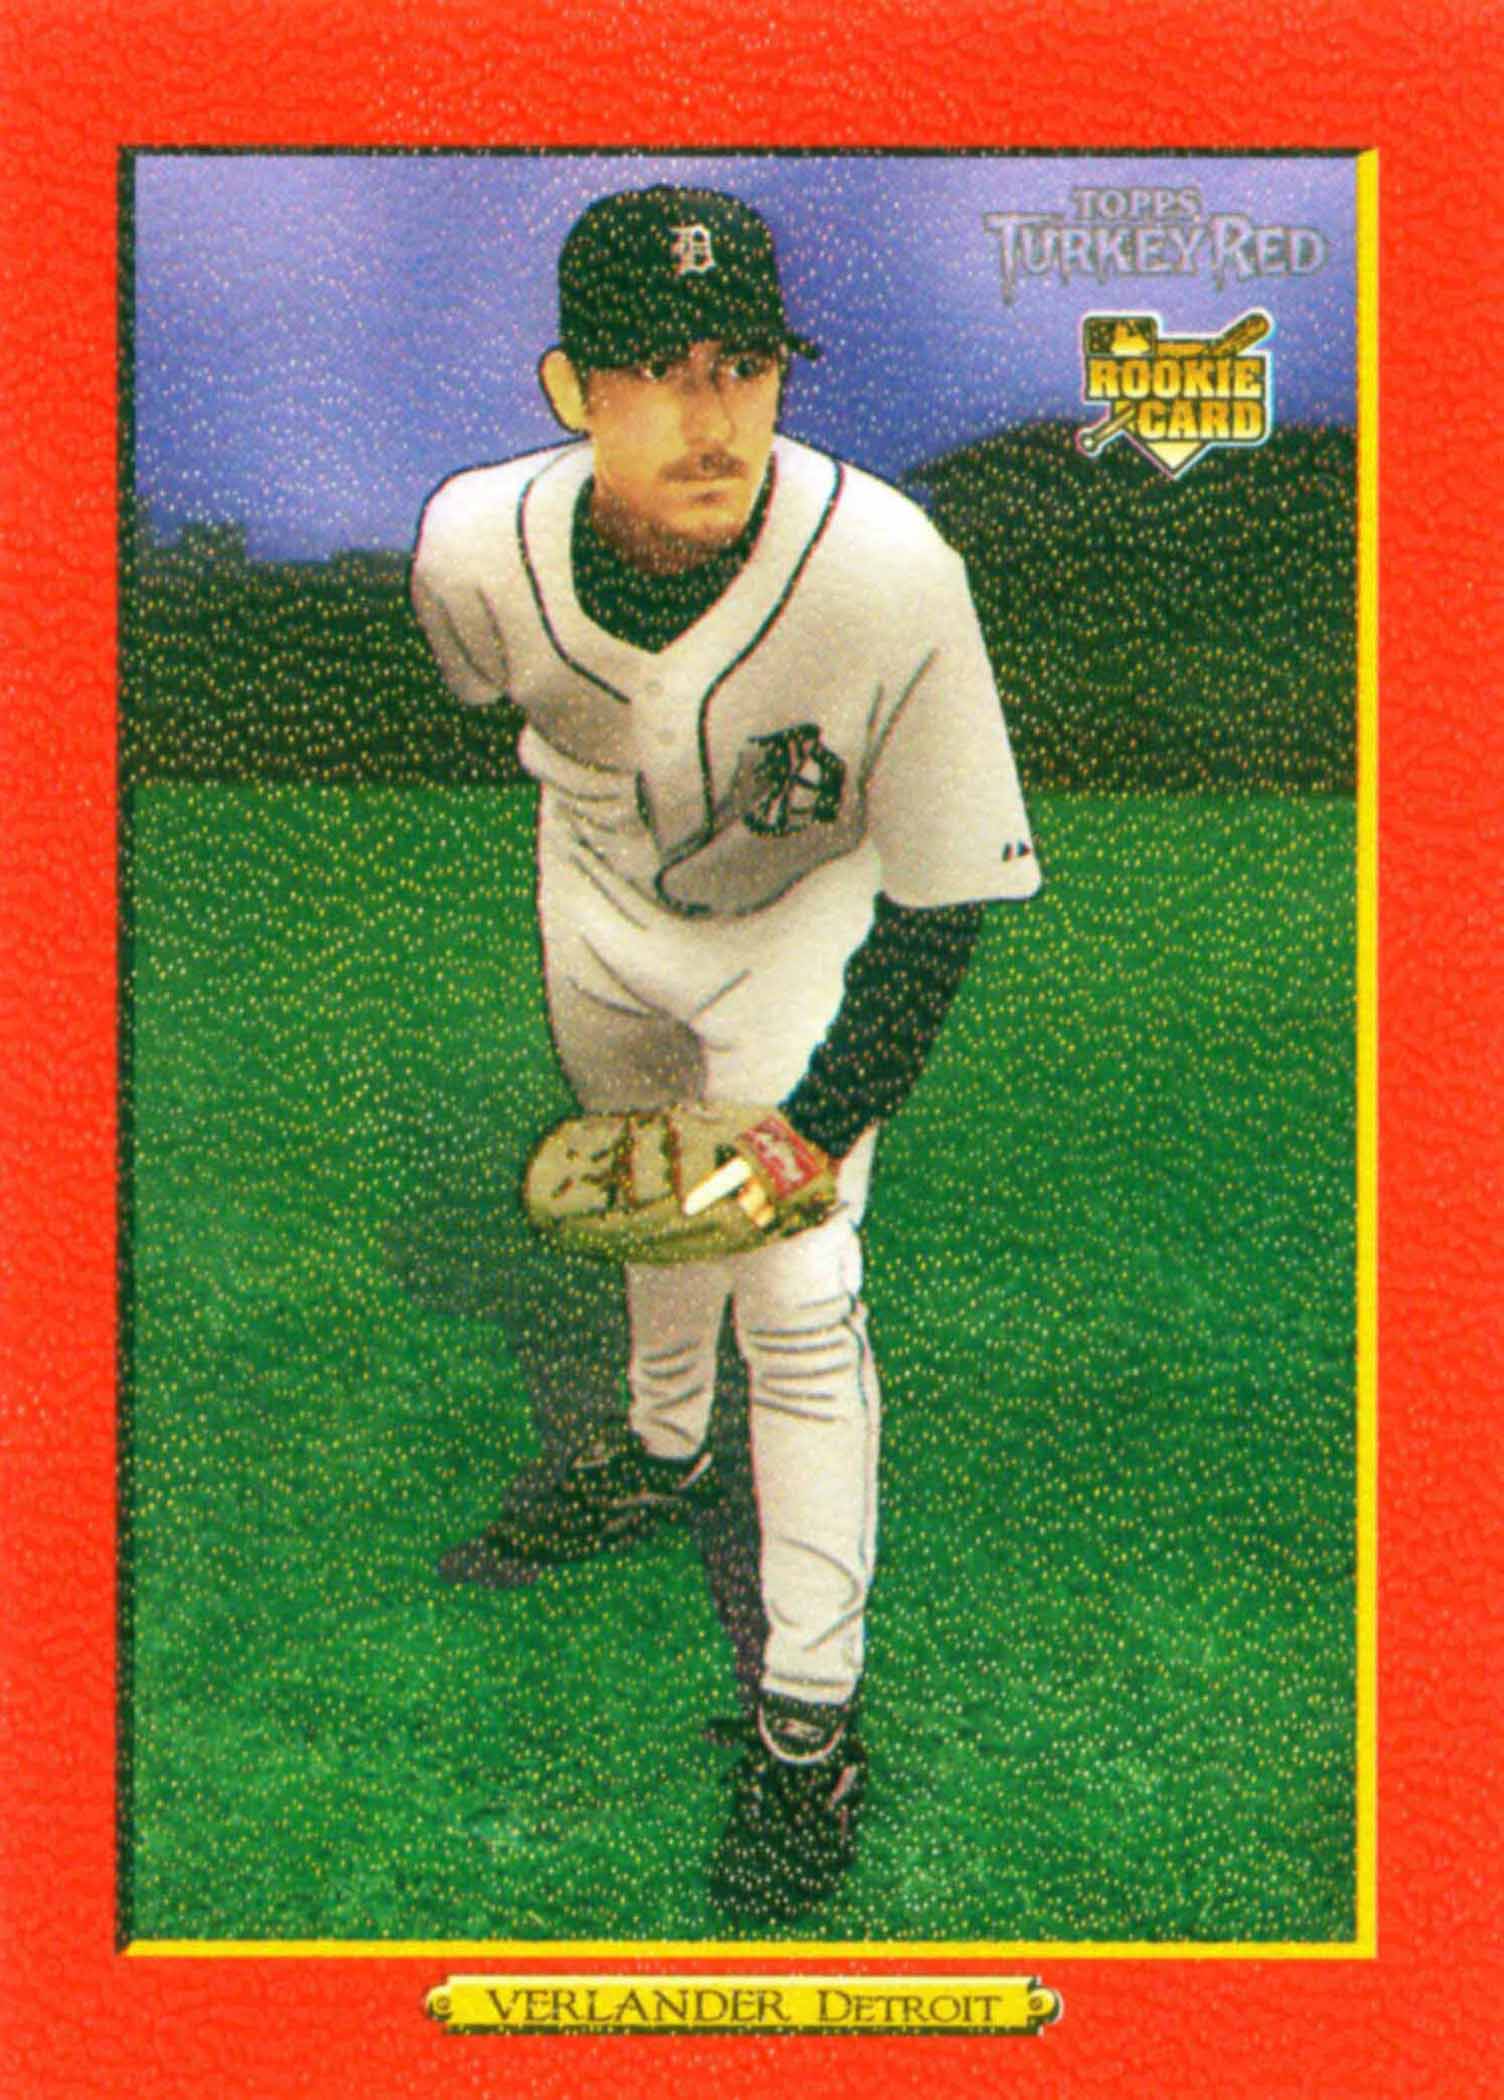 2006 Topps Turkey Red Red